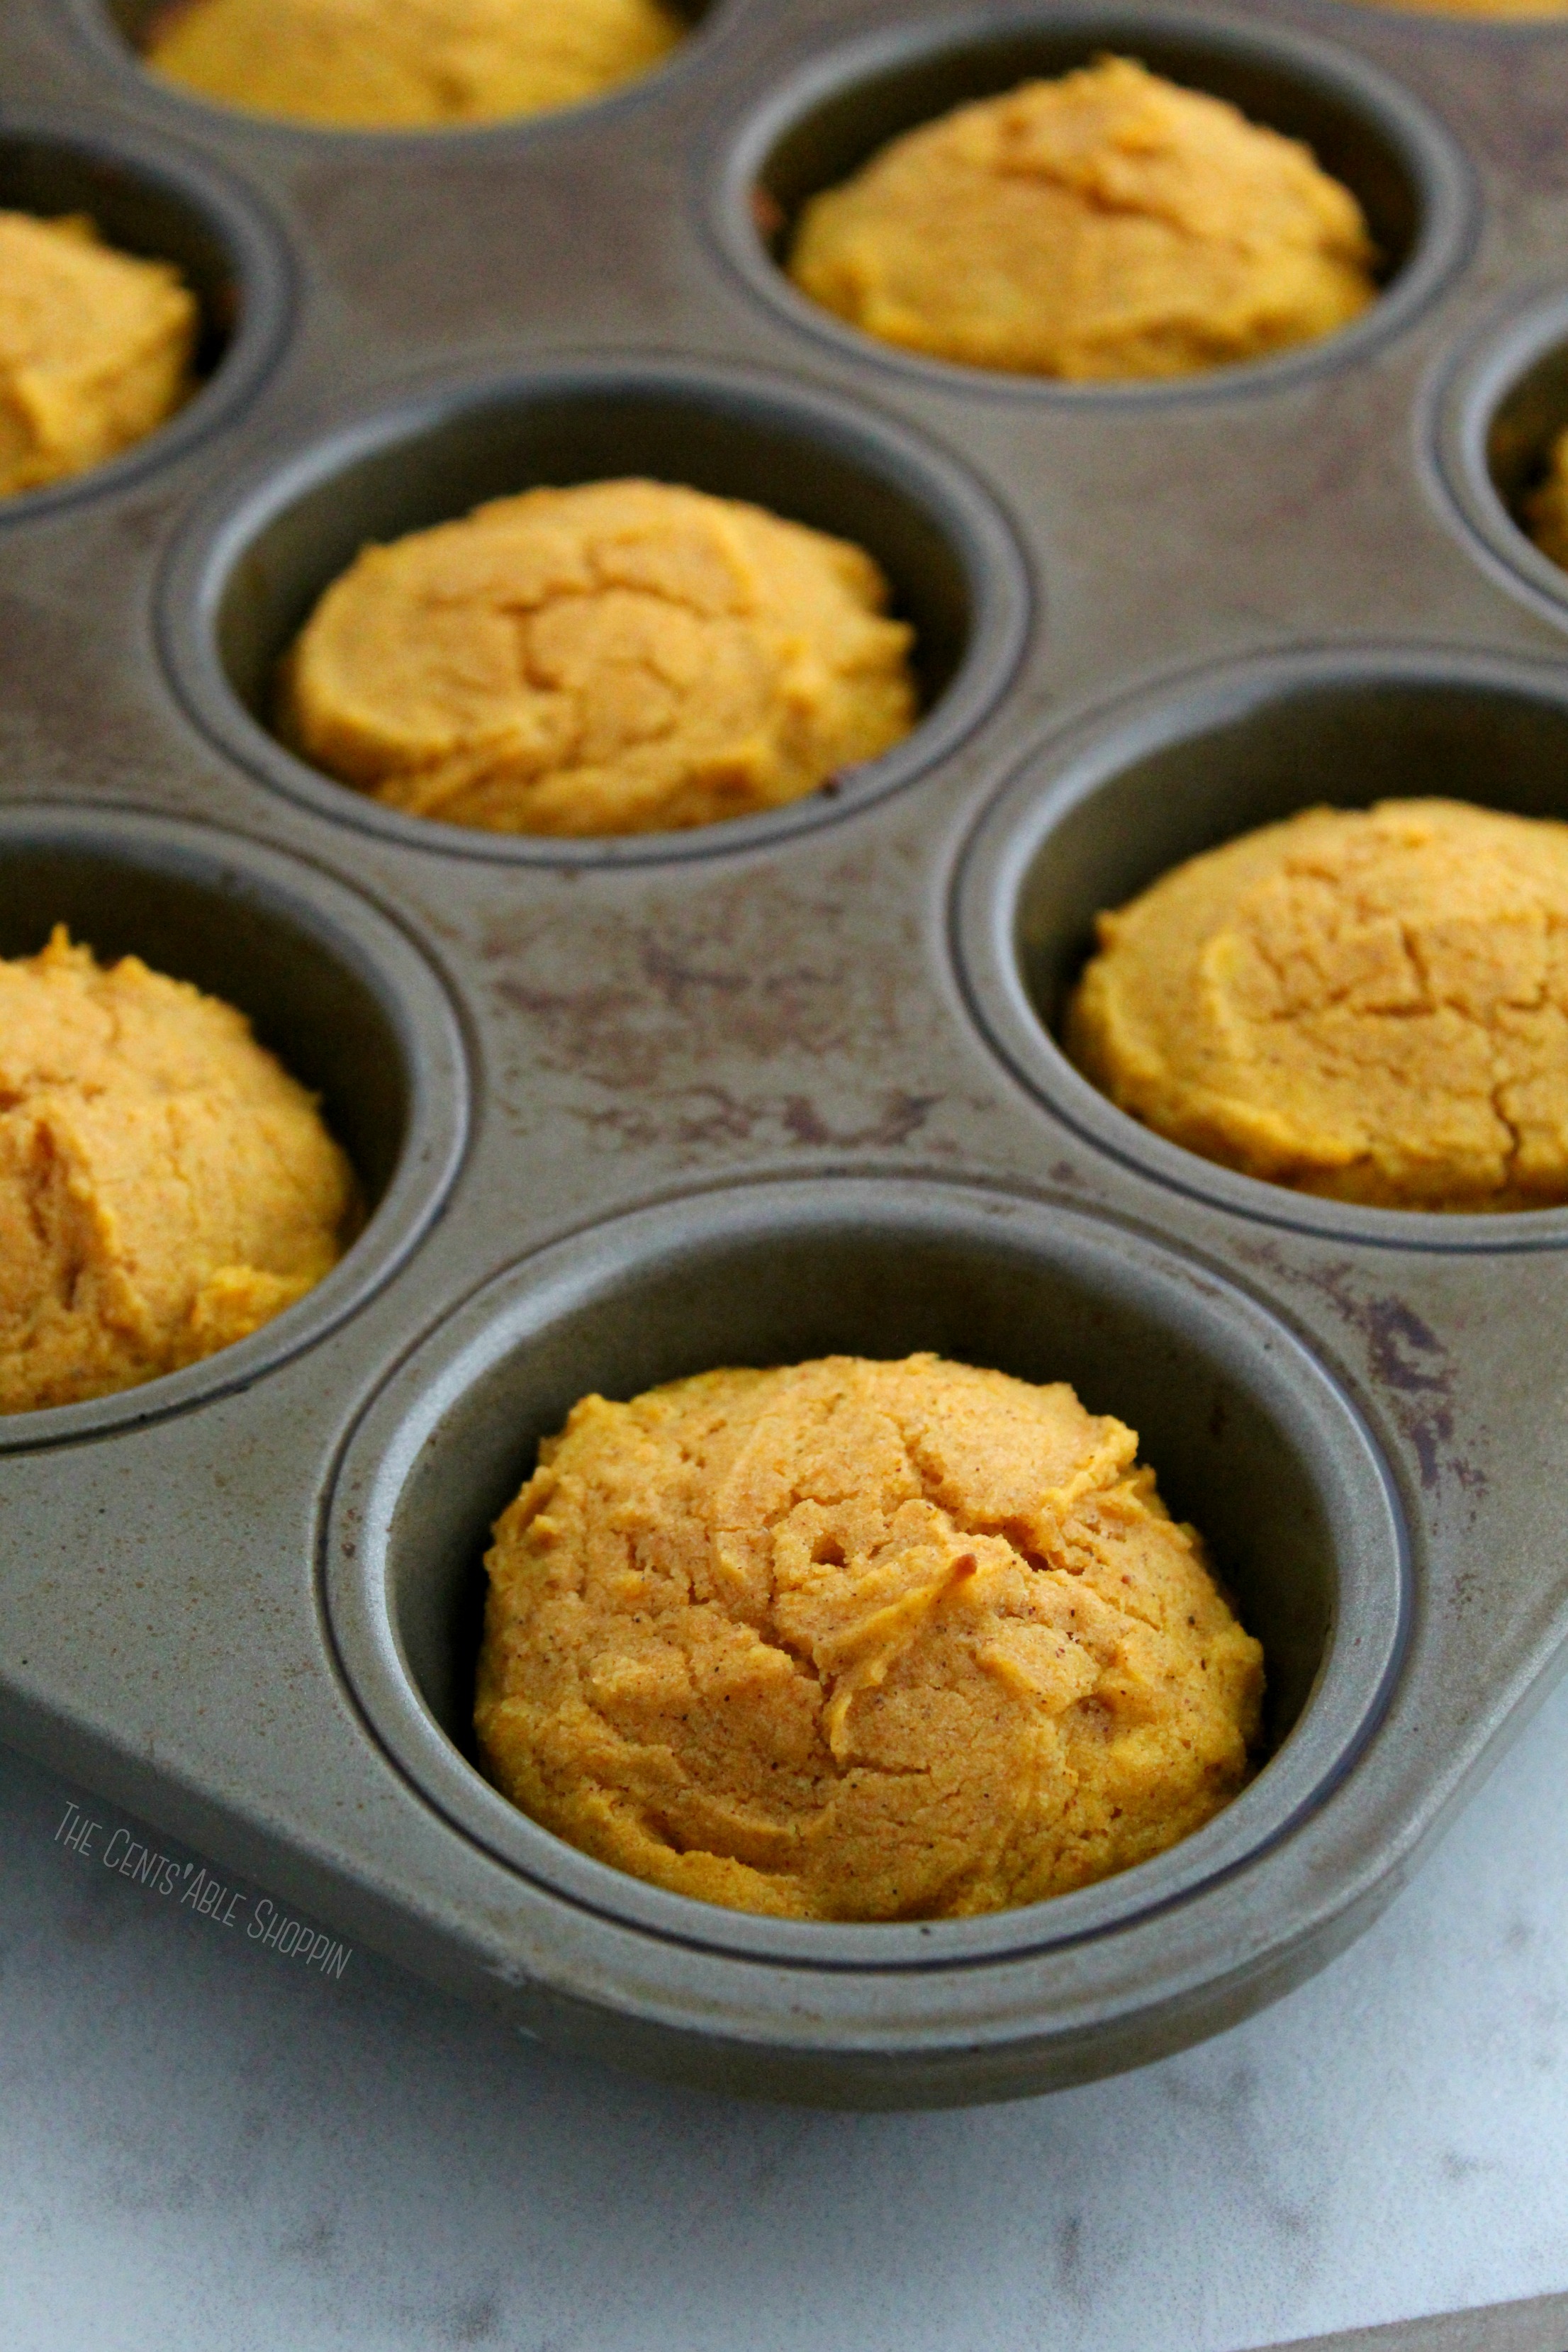 These Gluten Free Pumpkin Spice Muffins are soft, fluffy and sweet - made with the perfect amount of pumpkin spice. The perfect way to welcome fall!